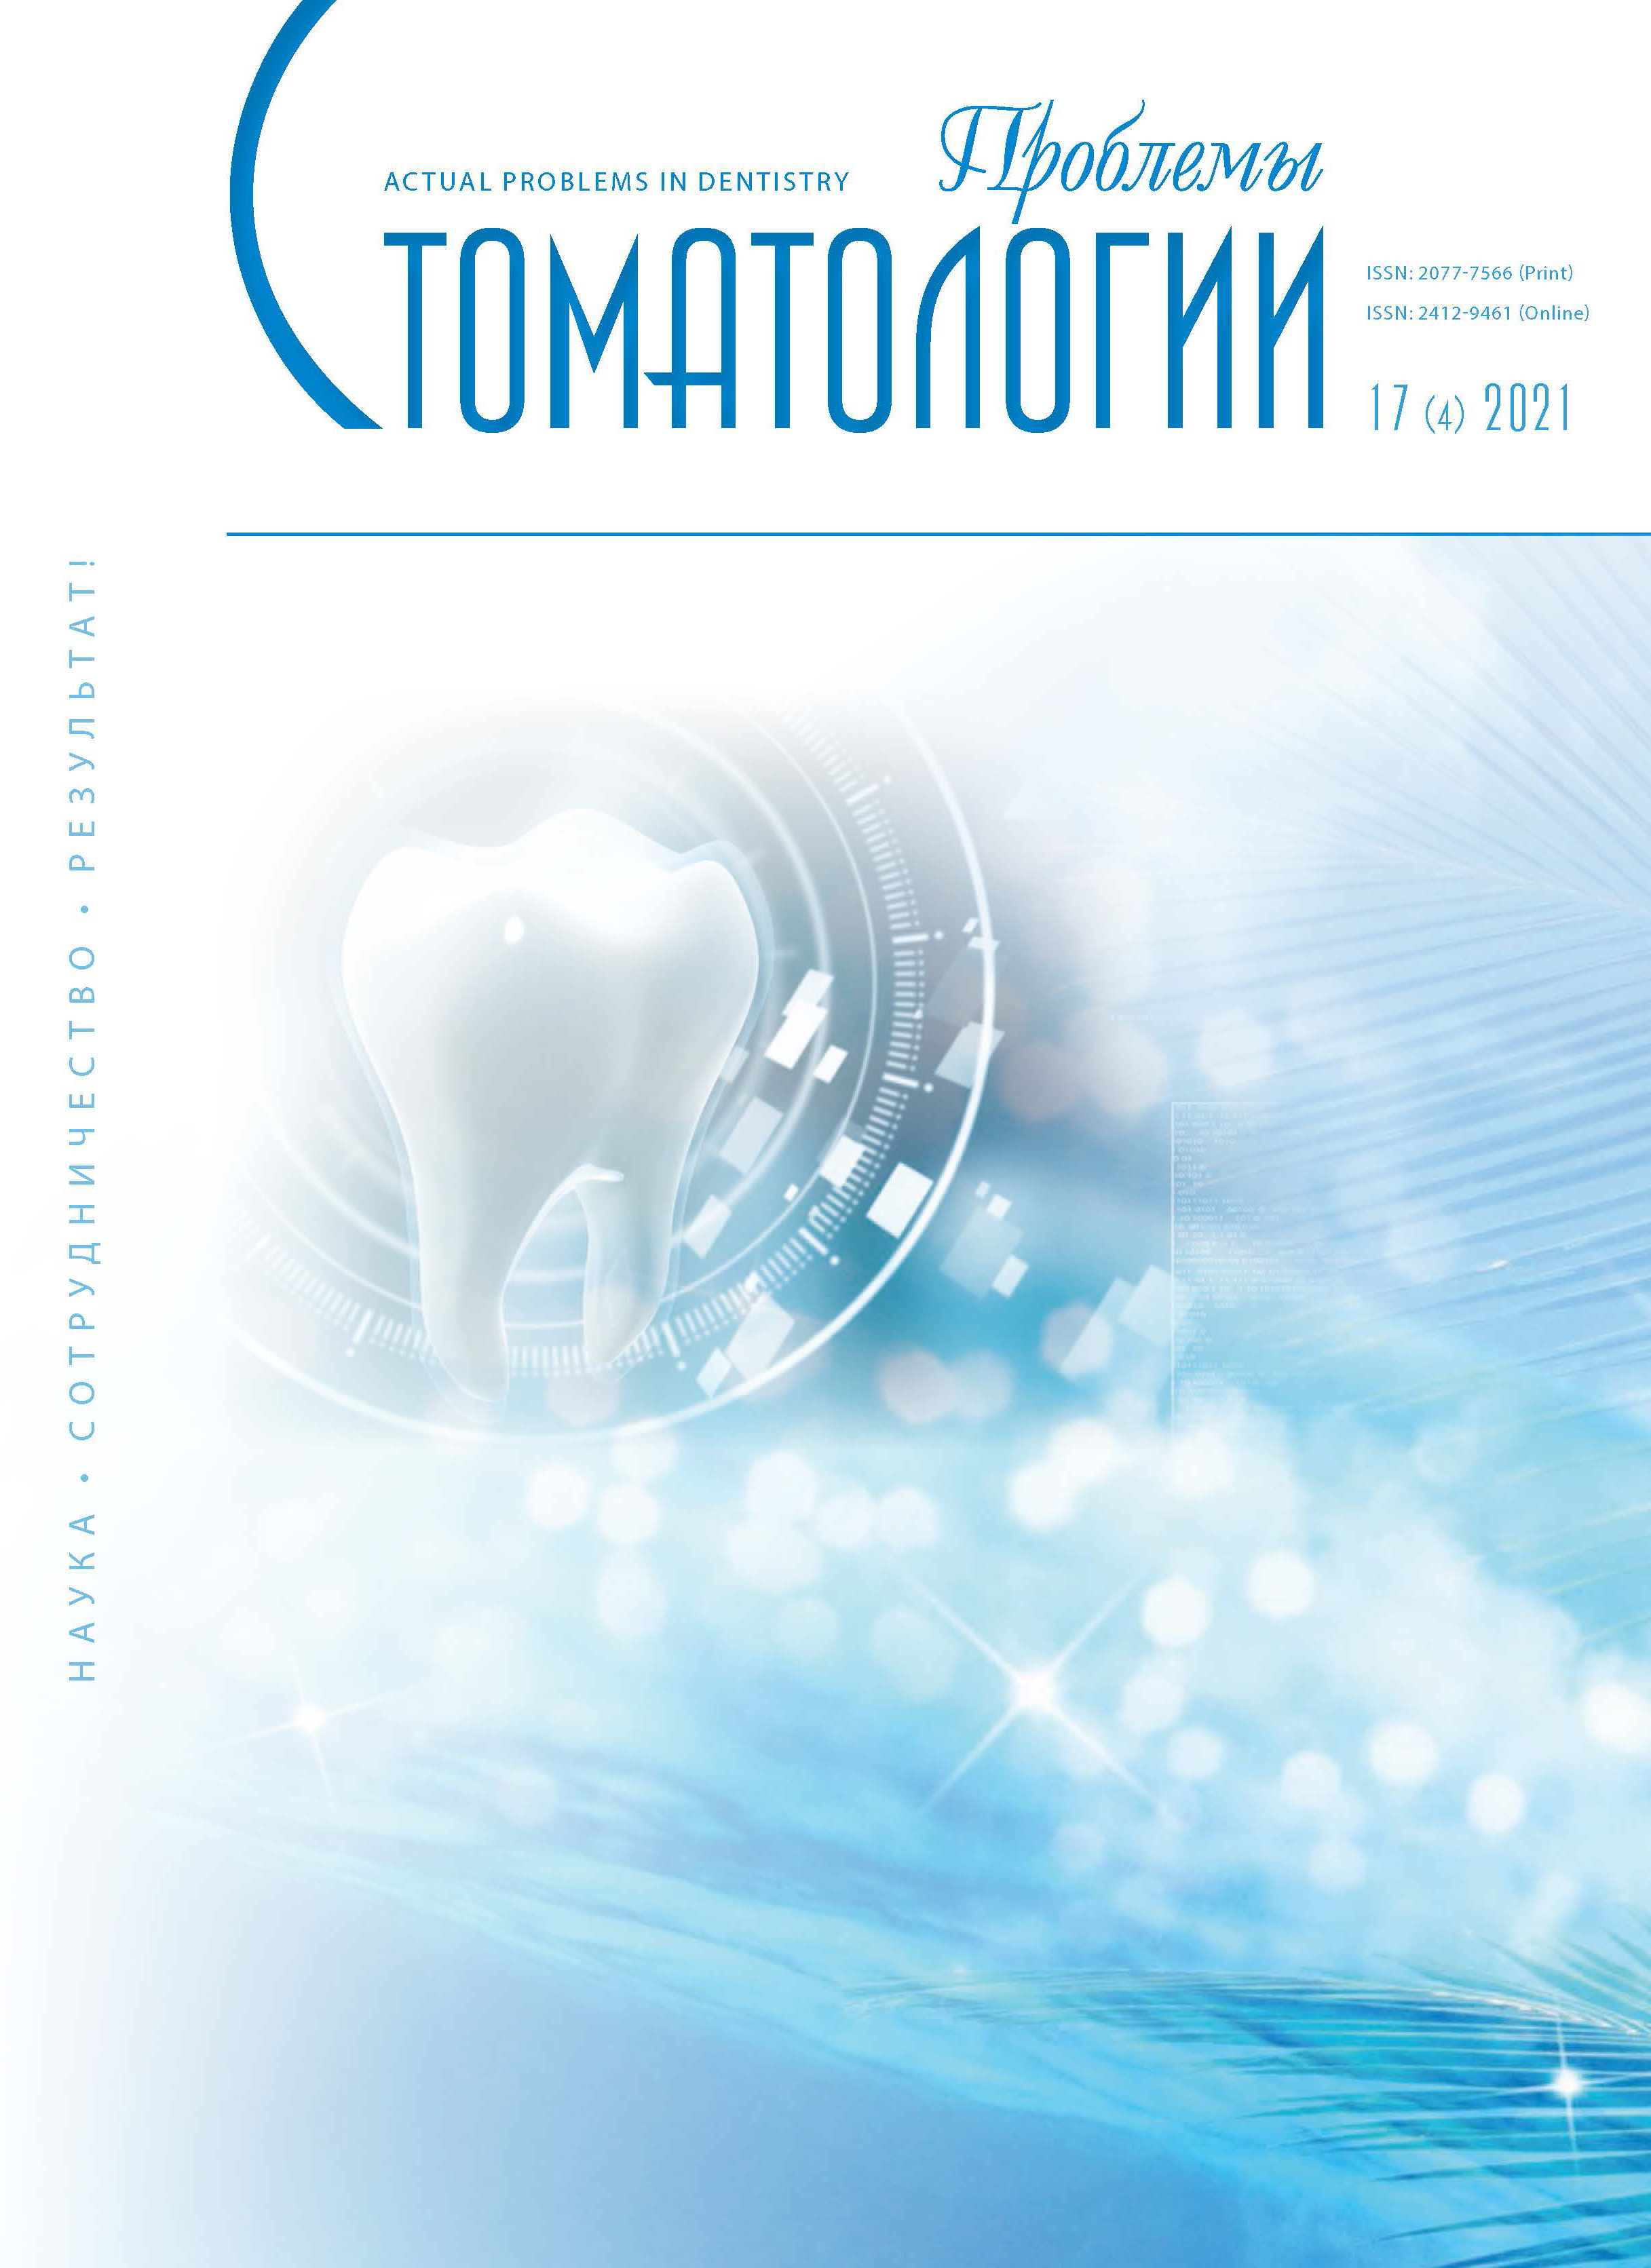                         EVALUATION OF THE RESULTS OF REPEATED ENDODONTIC TREATMENT OF CHRONIC APICAL PERIODONTITIS USING BIOMATERIALS. CLINICAL OBSERVATION
            